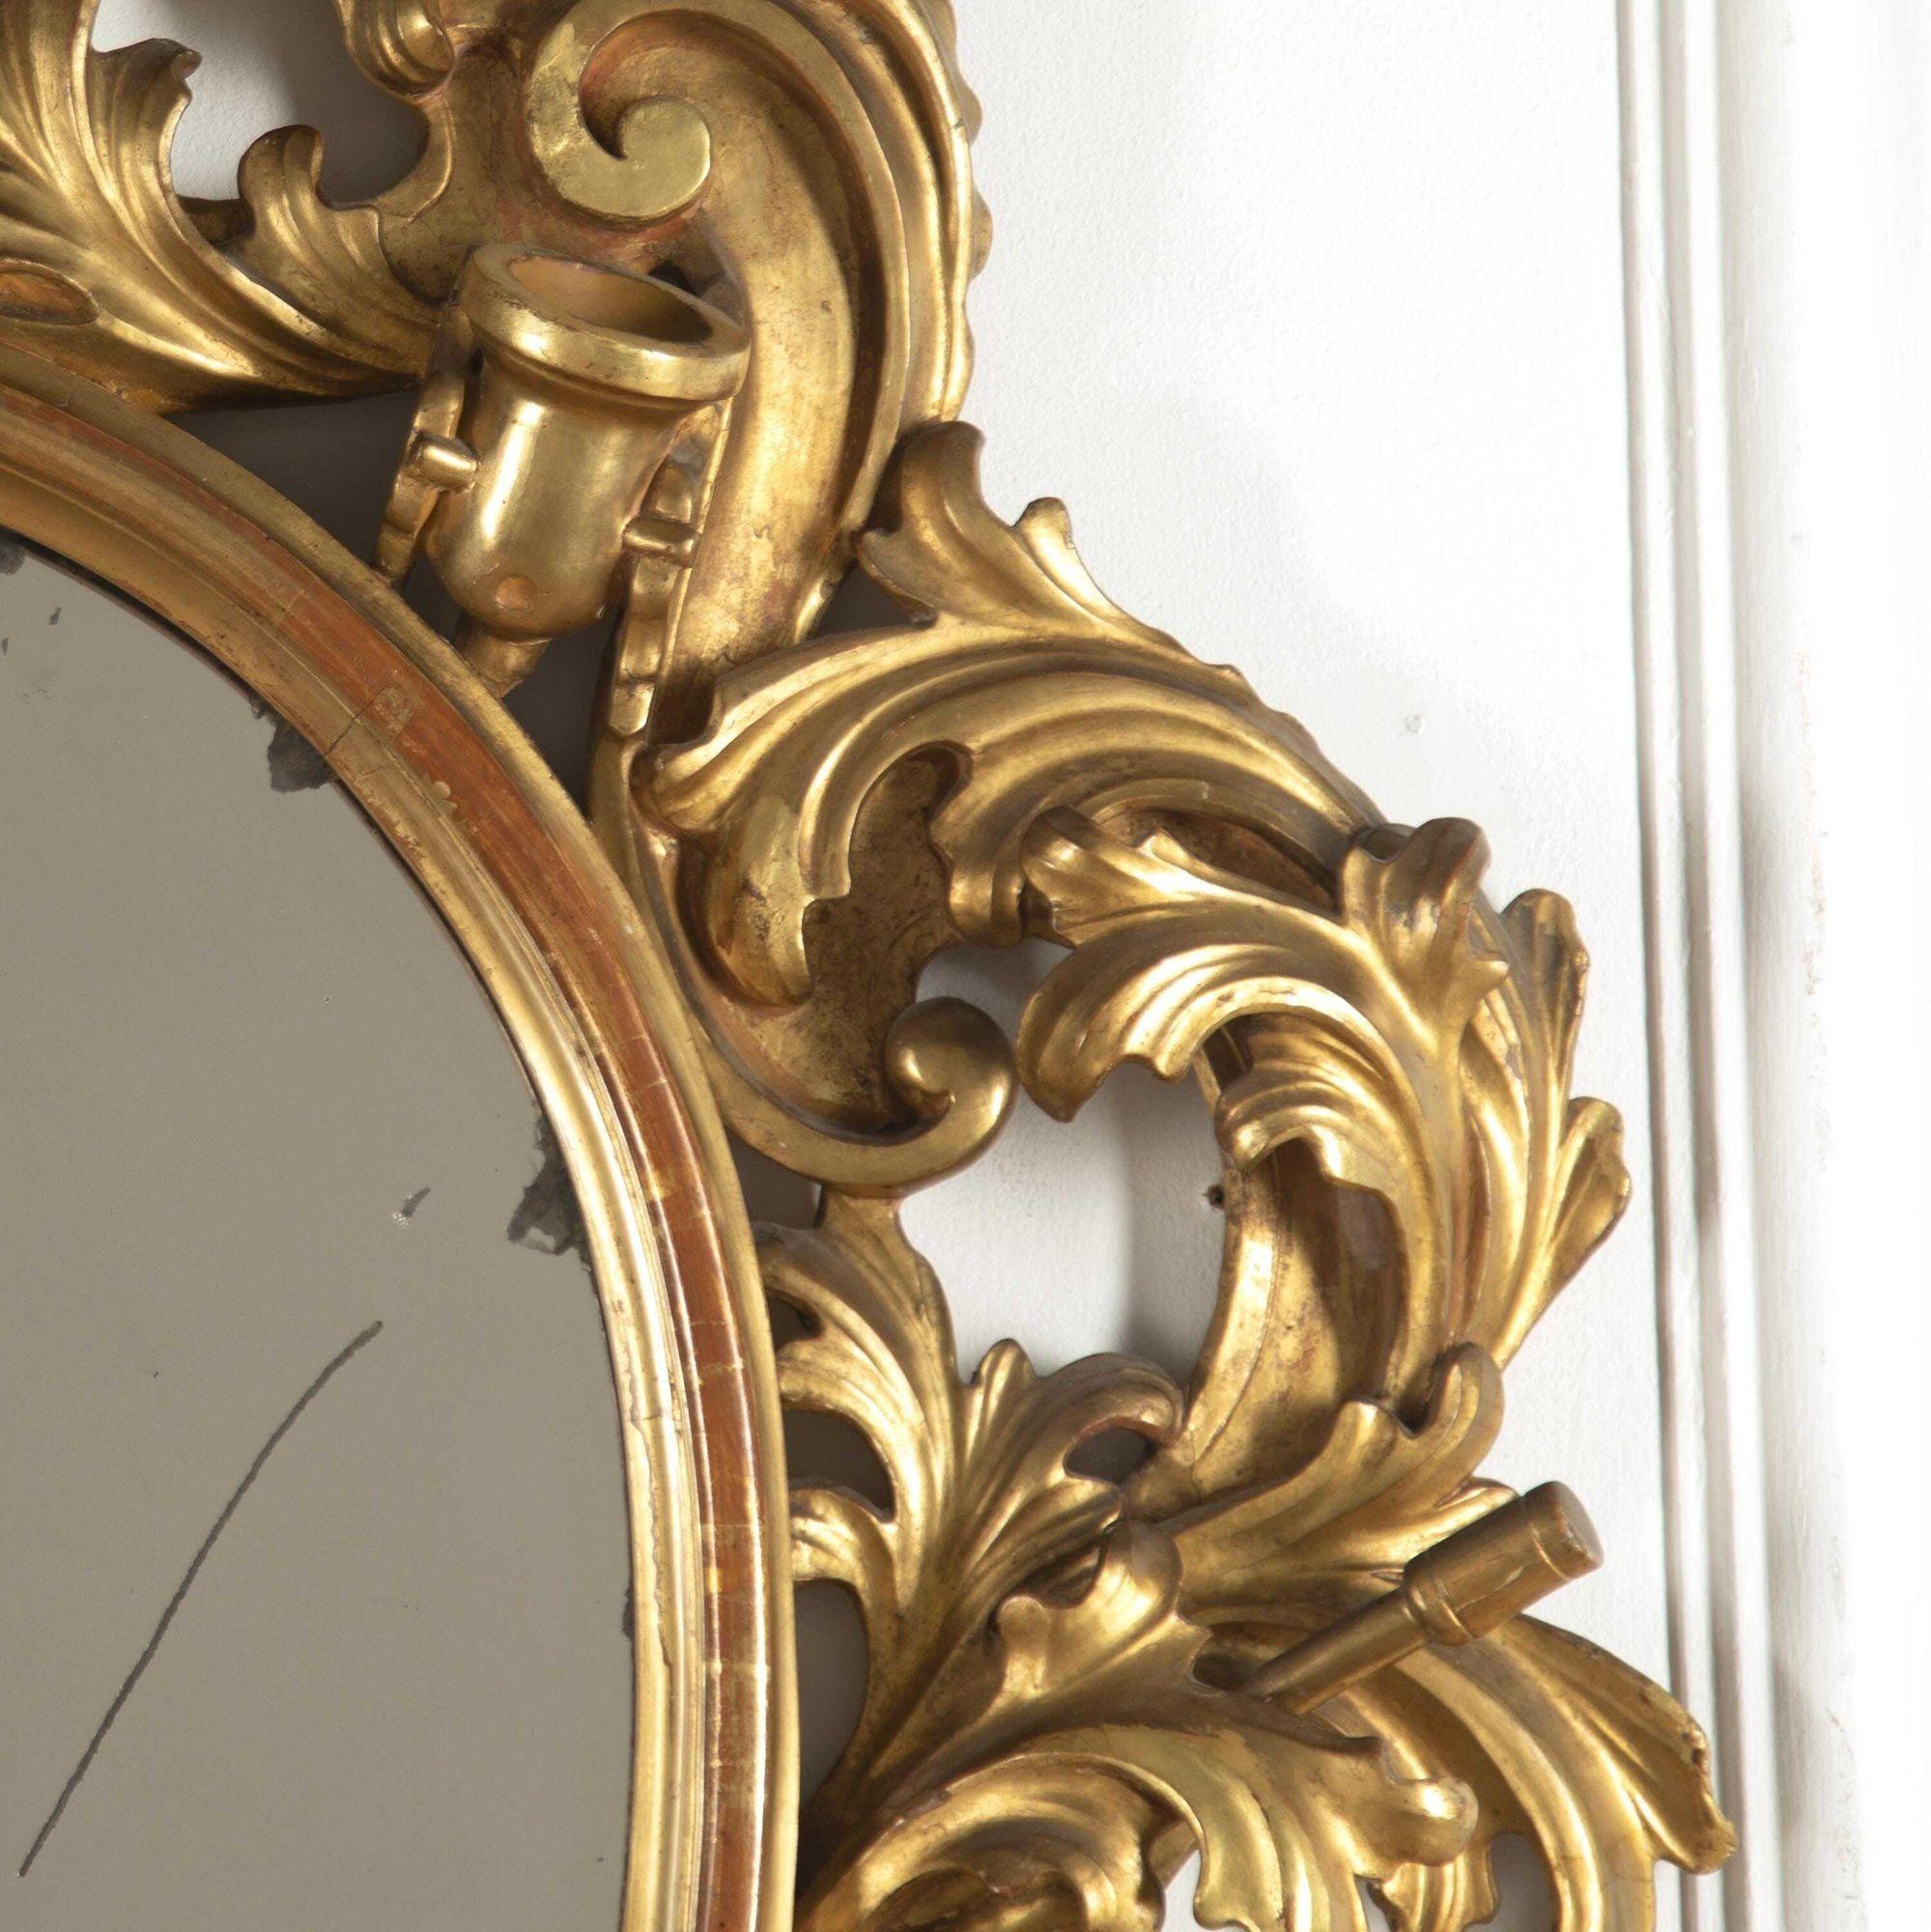 Florentine 19th century giltwood mirror.
This fantastic mirror is boldly carved with military trophies. It has its original oval mercury plate within a moulded frame that is surrounded by extravagant foliate carving.
The carvings throughout the